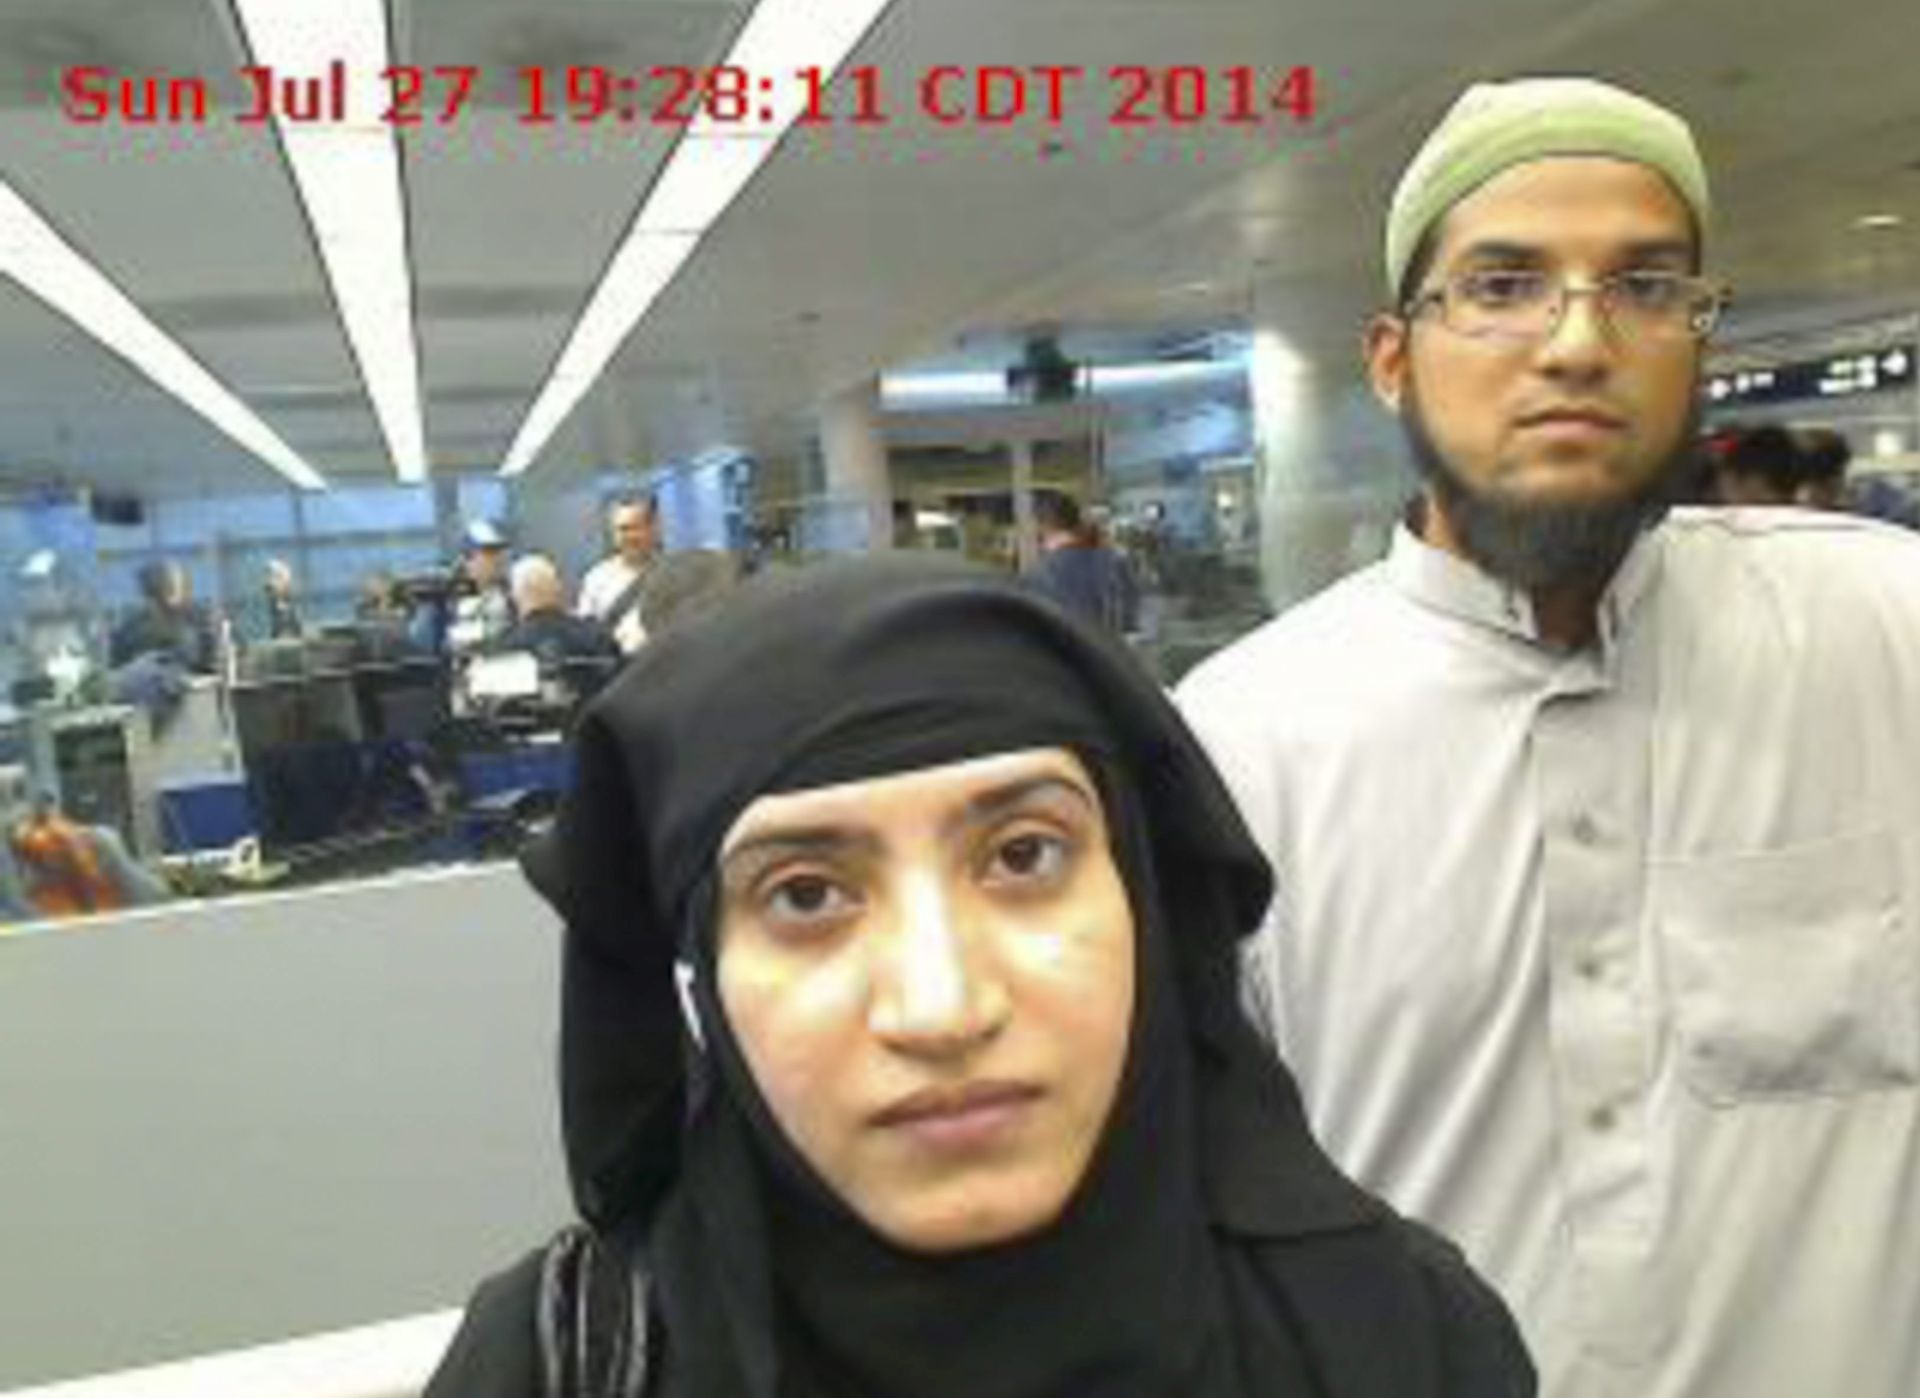 epa05058852 A photograph provided by US Customs and Border Protection (CBP) on 07 December 2015 shows Syed Rizwan Farook (R) and Tashfeen Malik (L) arriving at O'Hare International Airport in Chicago, Illinois, USA, on 27 July 2014. The couple have been identified by authorities as having killed 14 people and and wounded 21 others in a shooting in San Bernardino, California, USA, before being killed in a shootout with police.  EPA/US CUSTOMS AND BORDER PROTECTION / HANDOUT  HANDOUT EDITORIAL USE ONLY/NO SALES